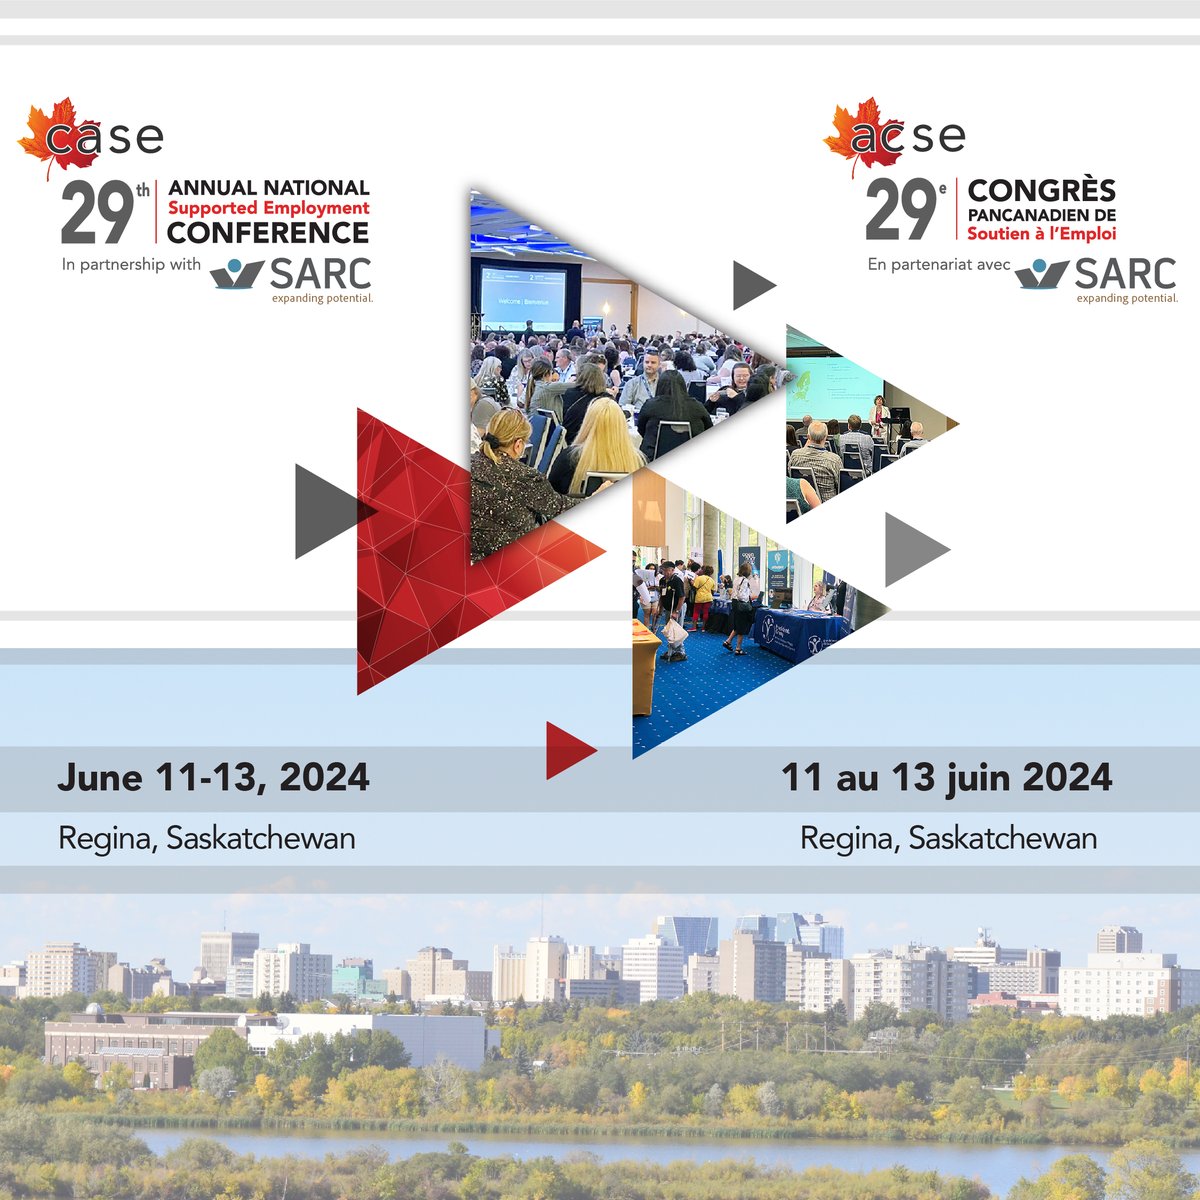 Attention, #29thCASEConference attendees: the special group rate at the Delta Hotels by Marriott Regina ends this Friday, May 10th. Book now! site.pheedloop.com/event/case2024… @sarc_sk, @DeltaRegina